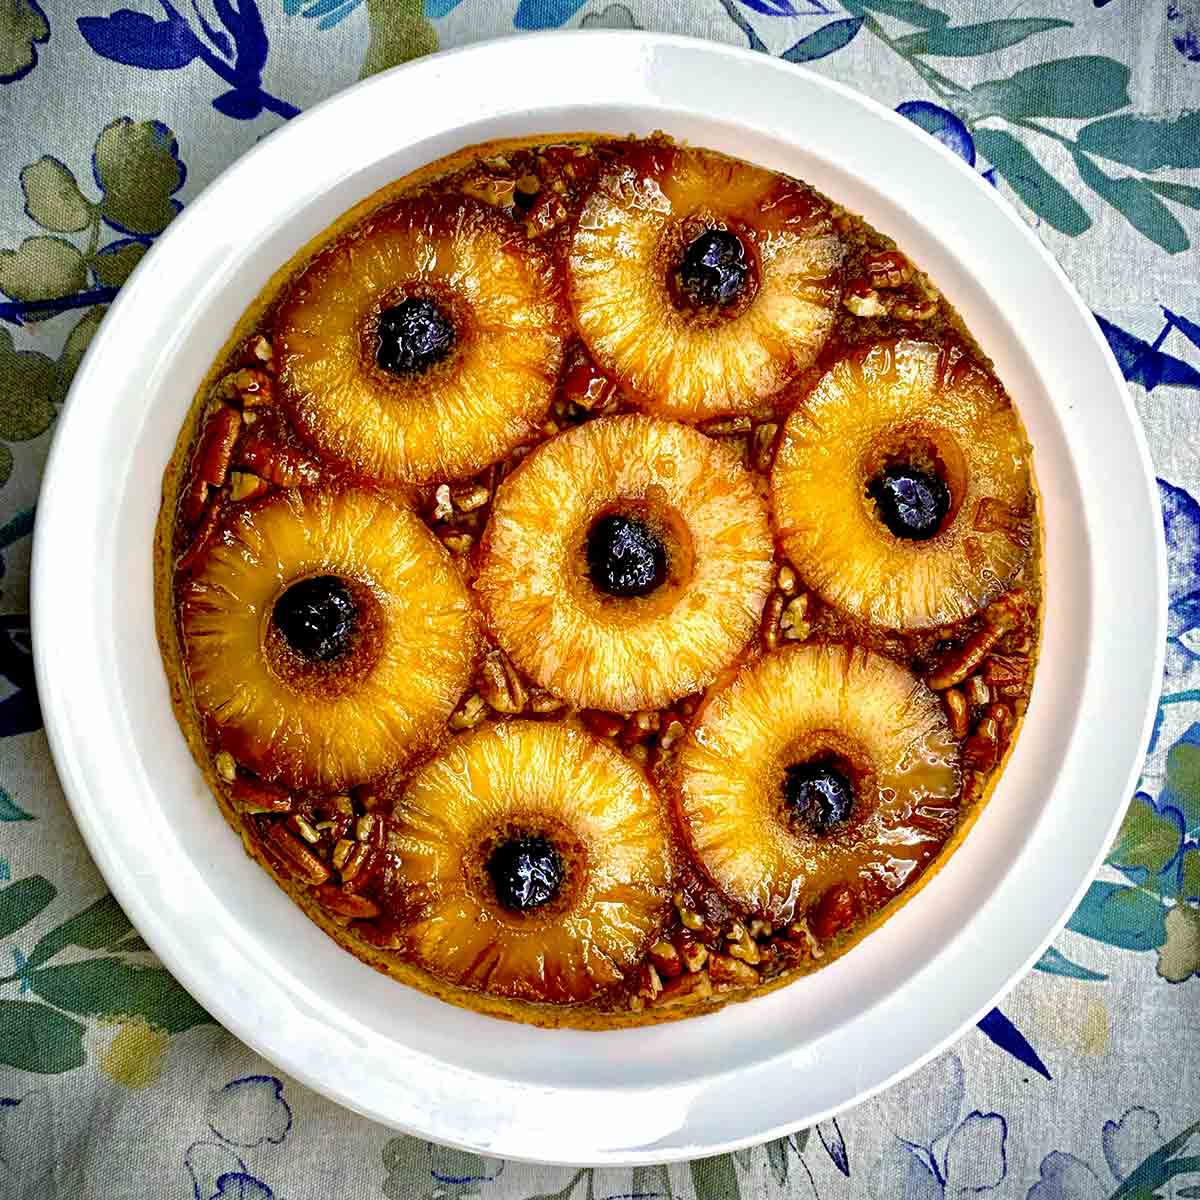 A pineapple upside-down cake on a white plate